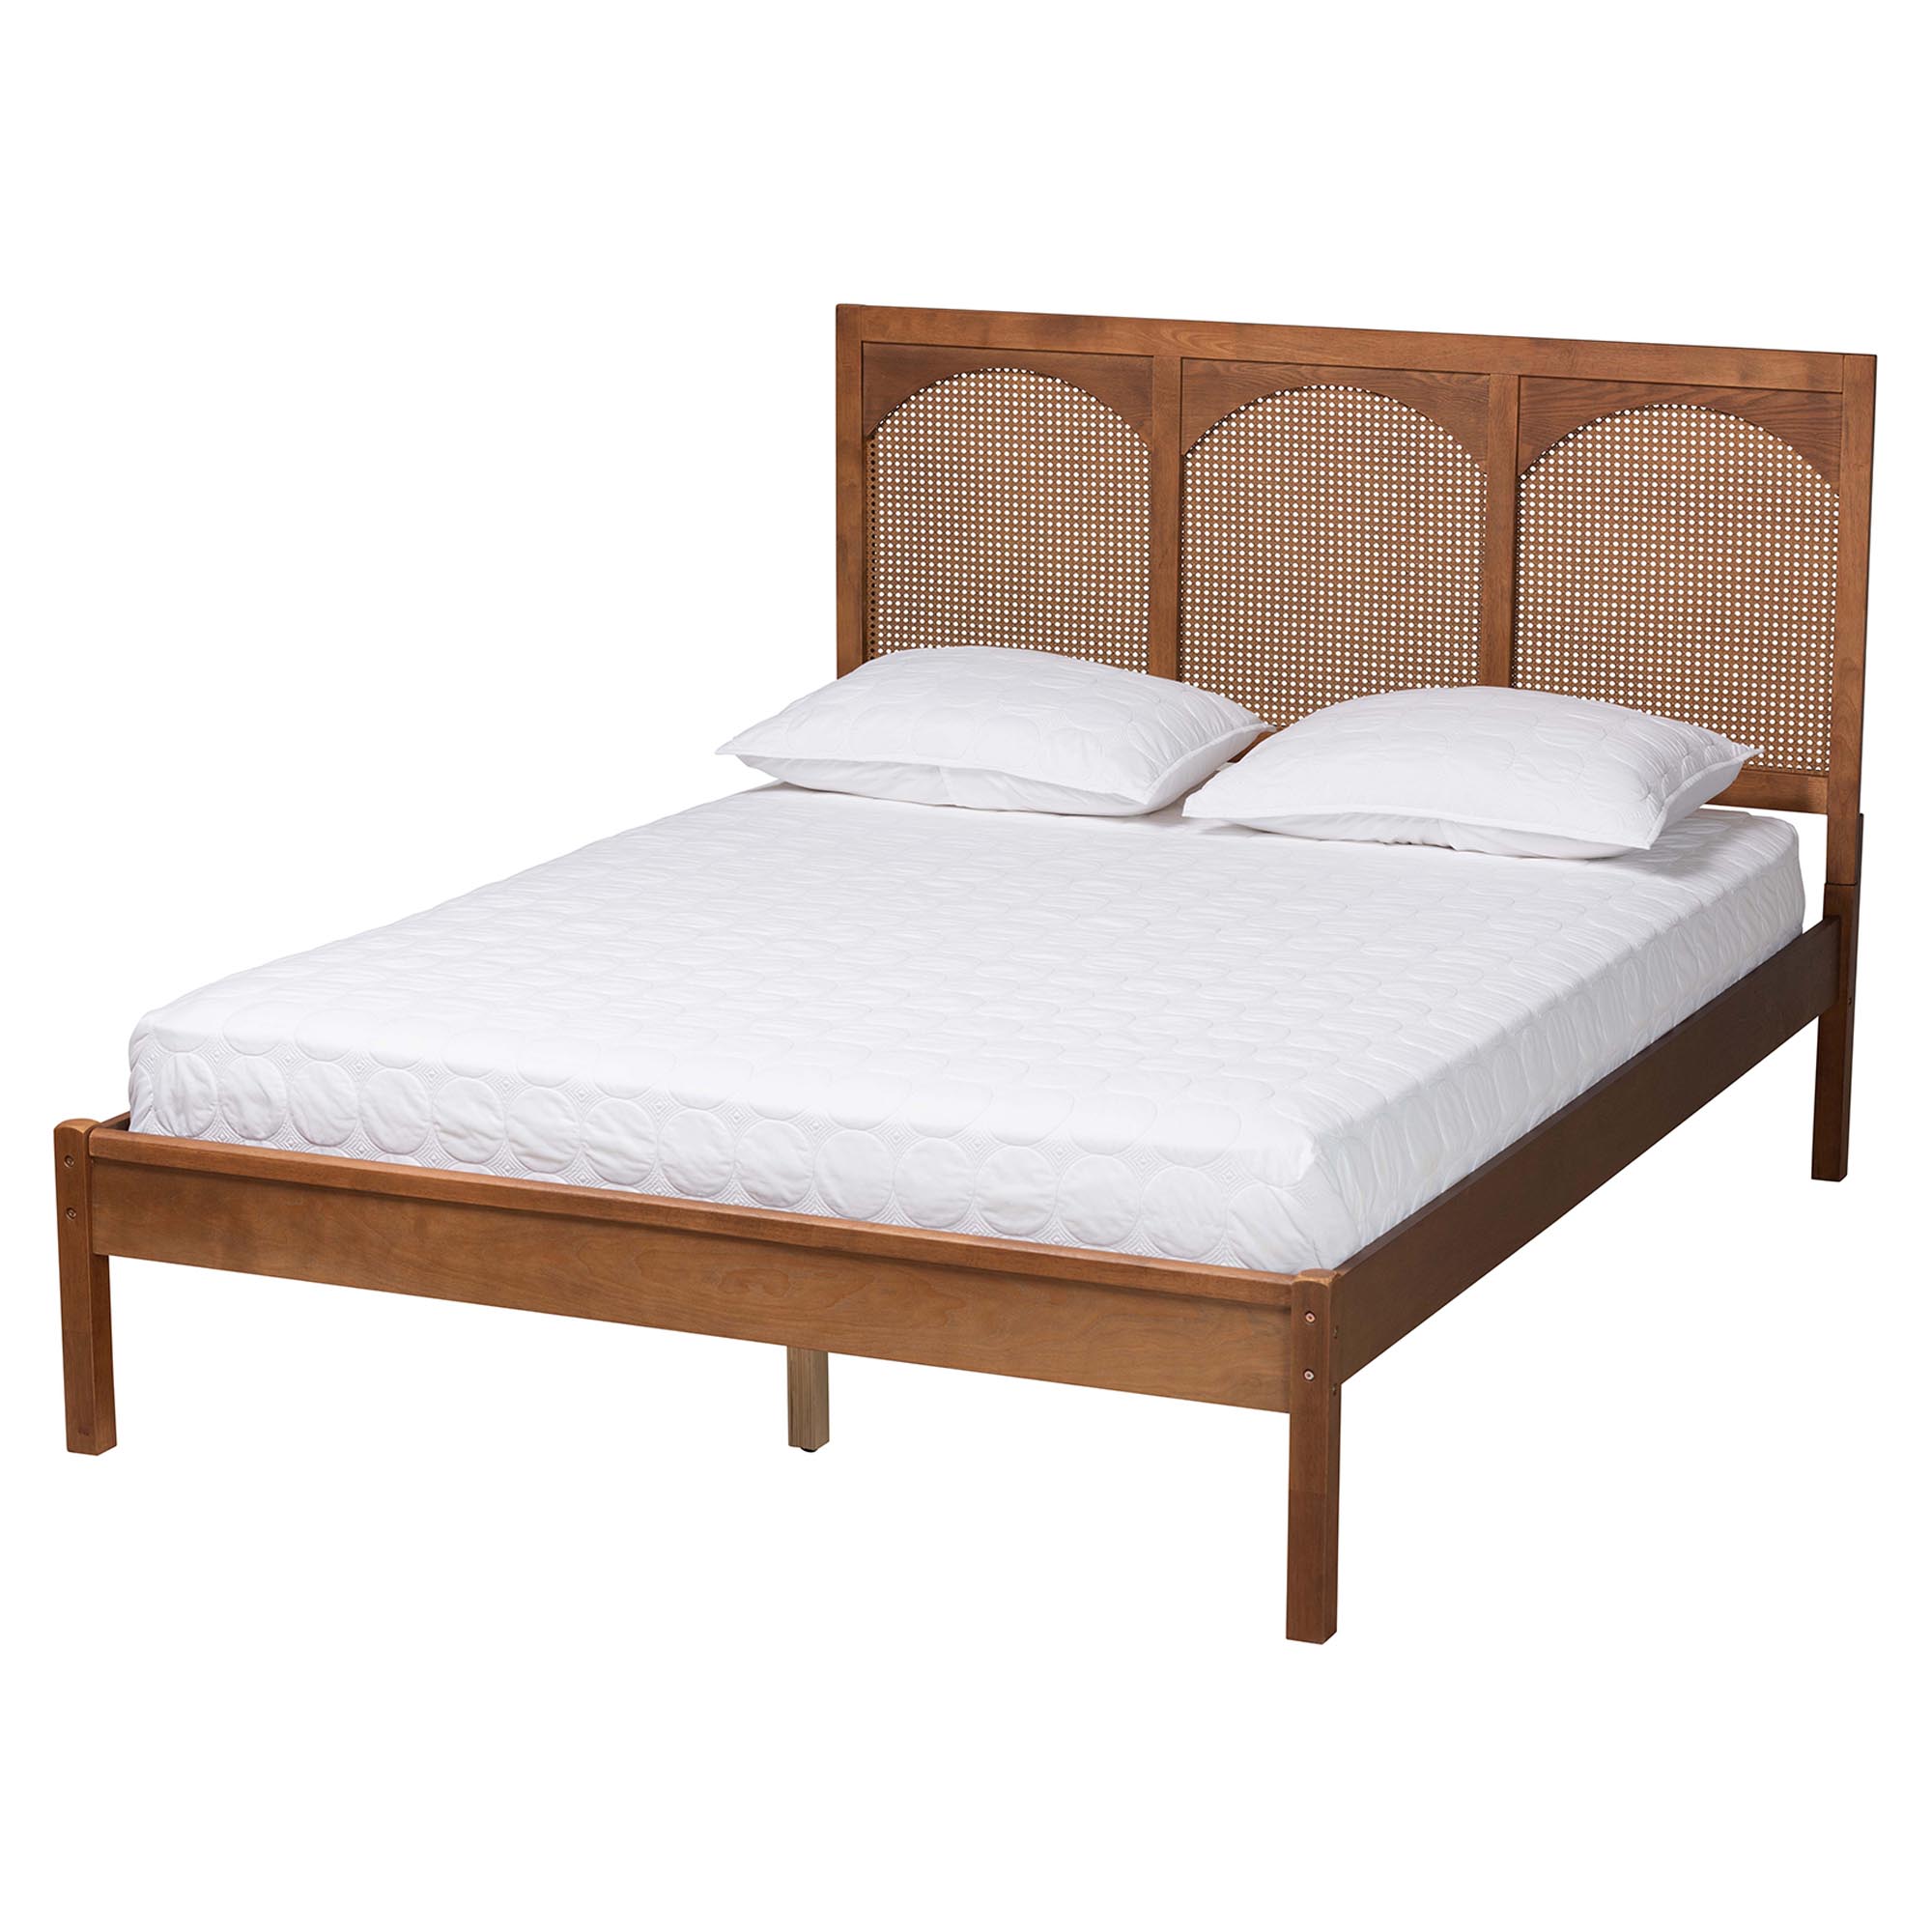 Baxton Studio Blossom Classic and Traditional Ash Walnut Finished Wood and Rattan King Size Platform Bed